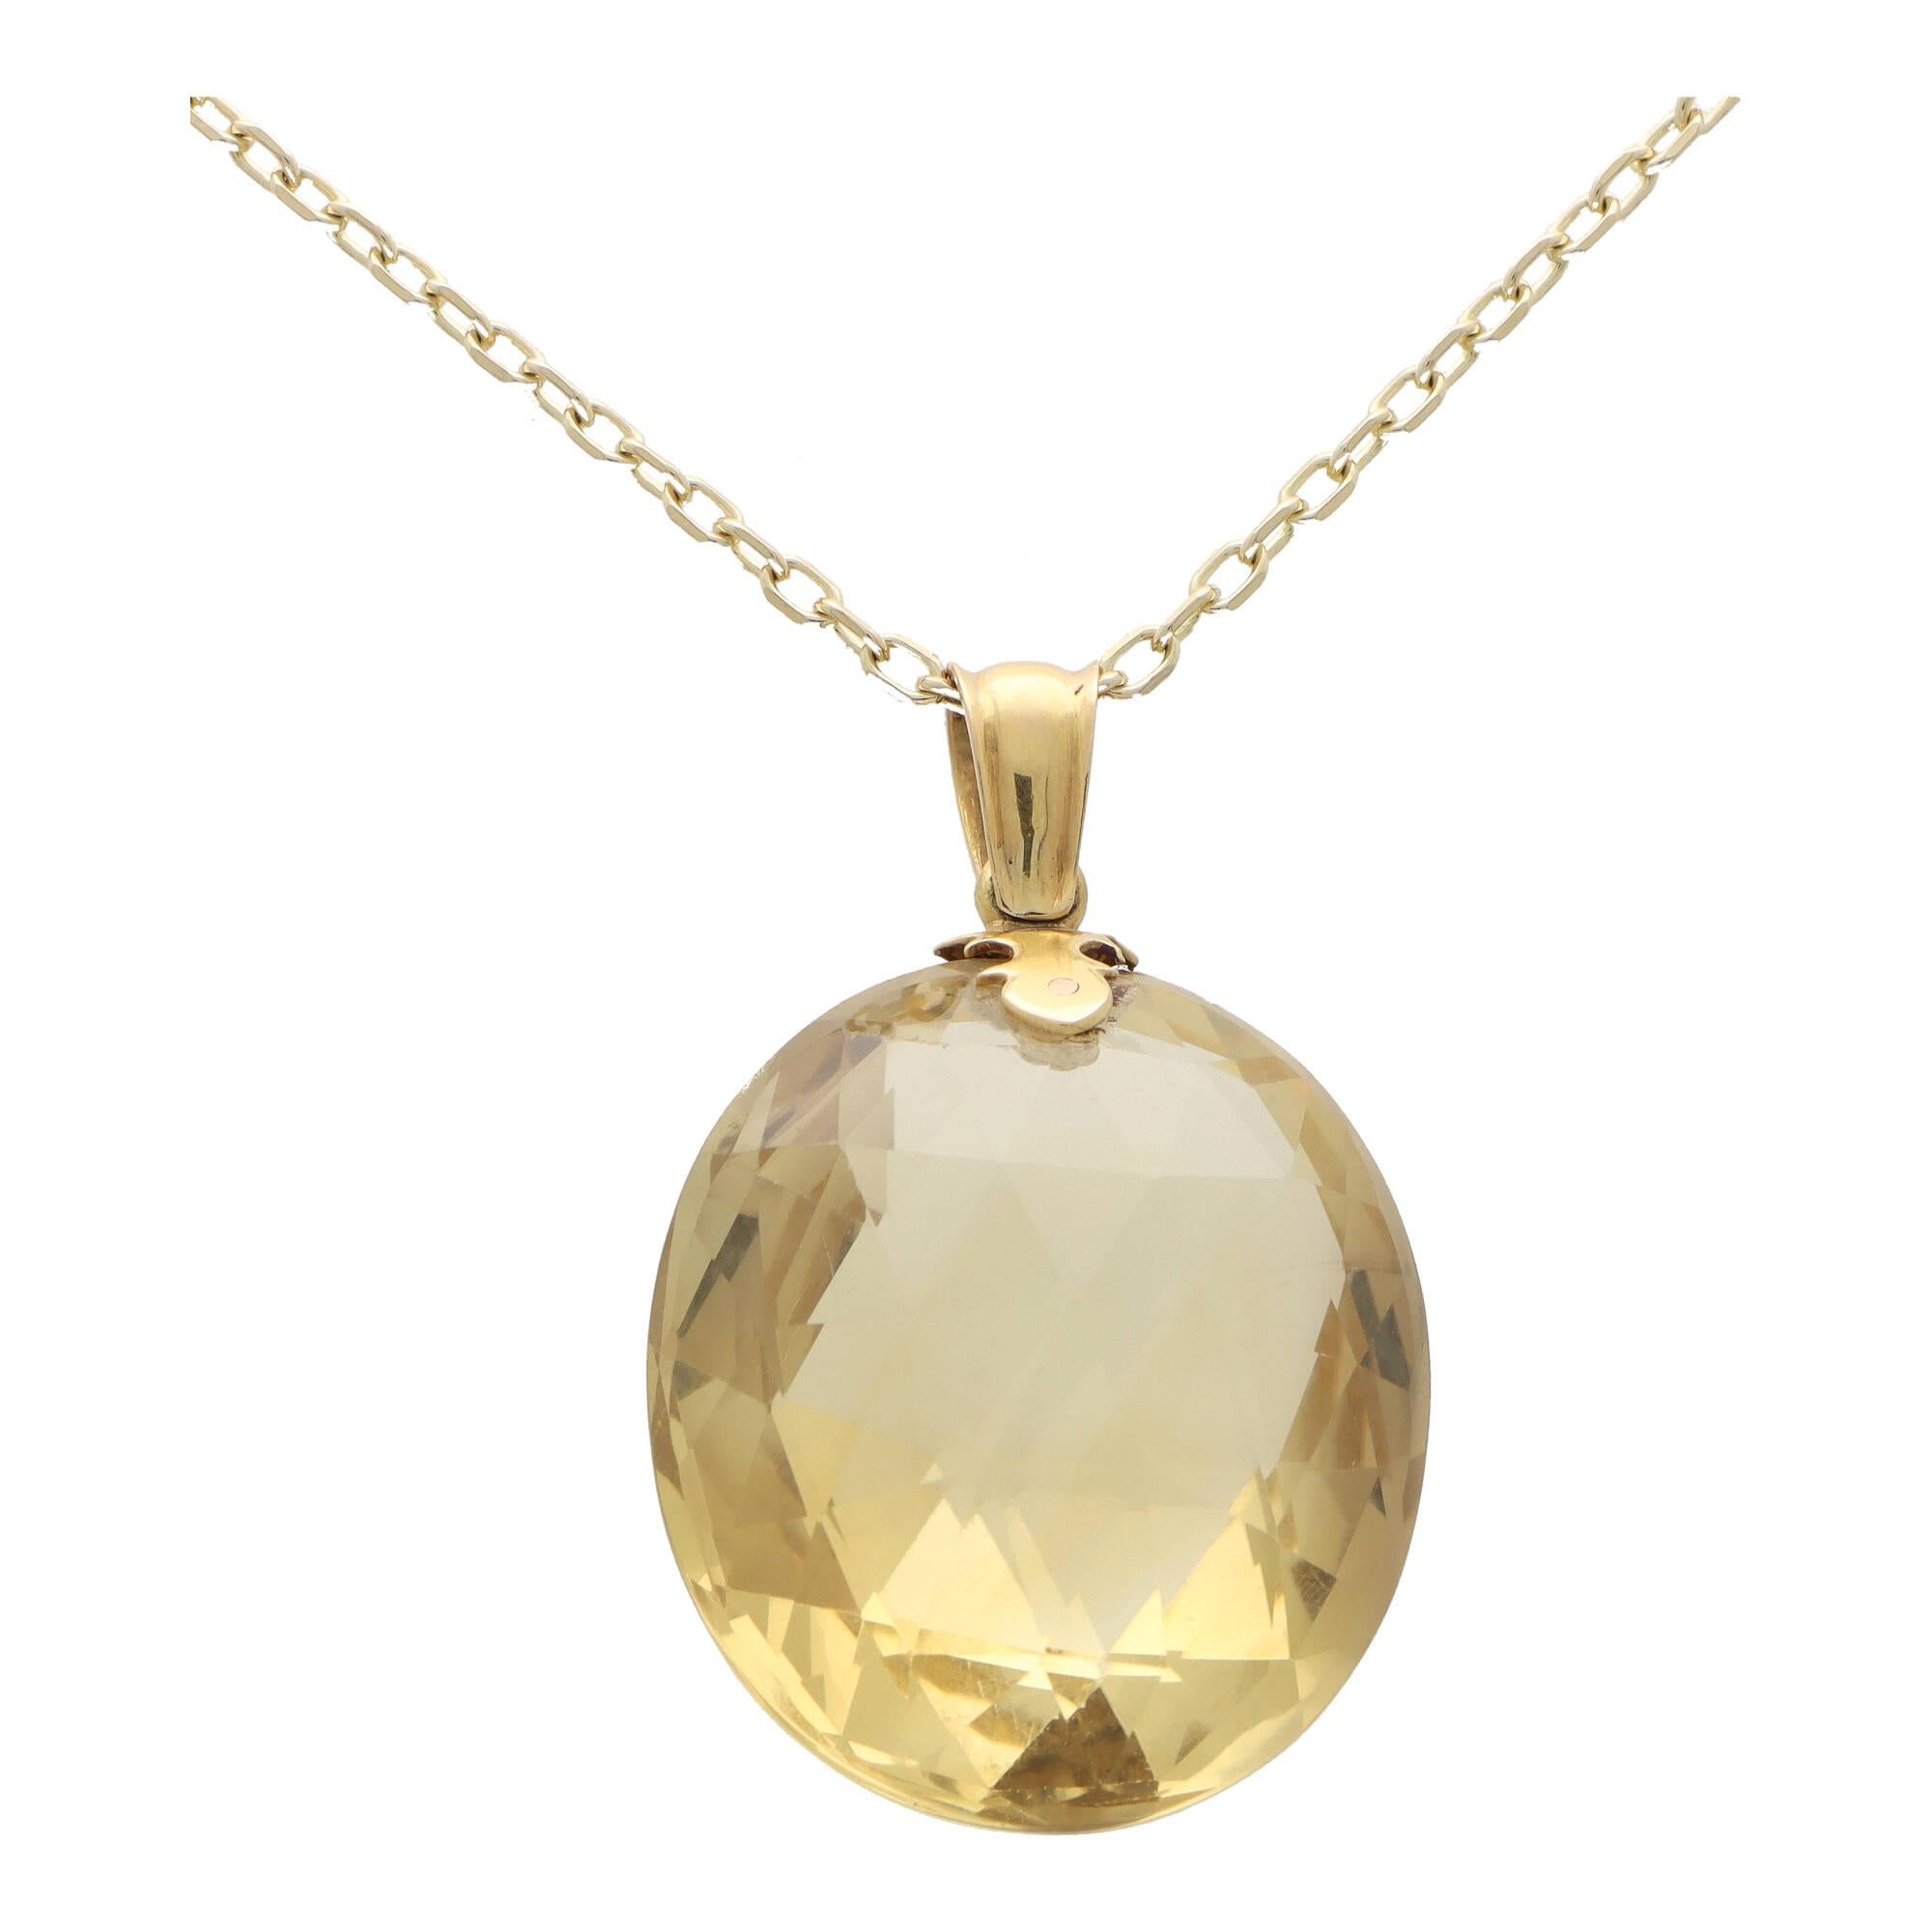 A visually spectacular checkerboard cut citrine pendant set in 9k yellow gold. 

The pendant is solely set with a staggering 100.39 carat oval citrine stone which has been checkerboard cut to both sides. The checkerboard facets project this